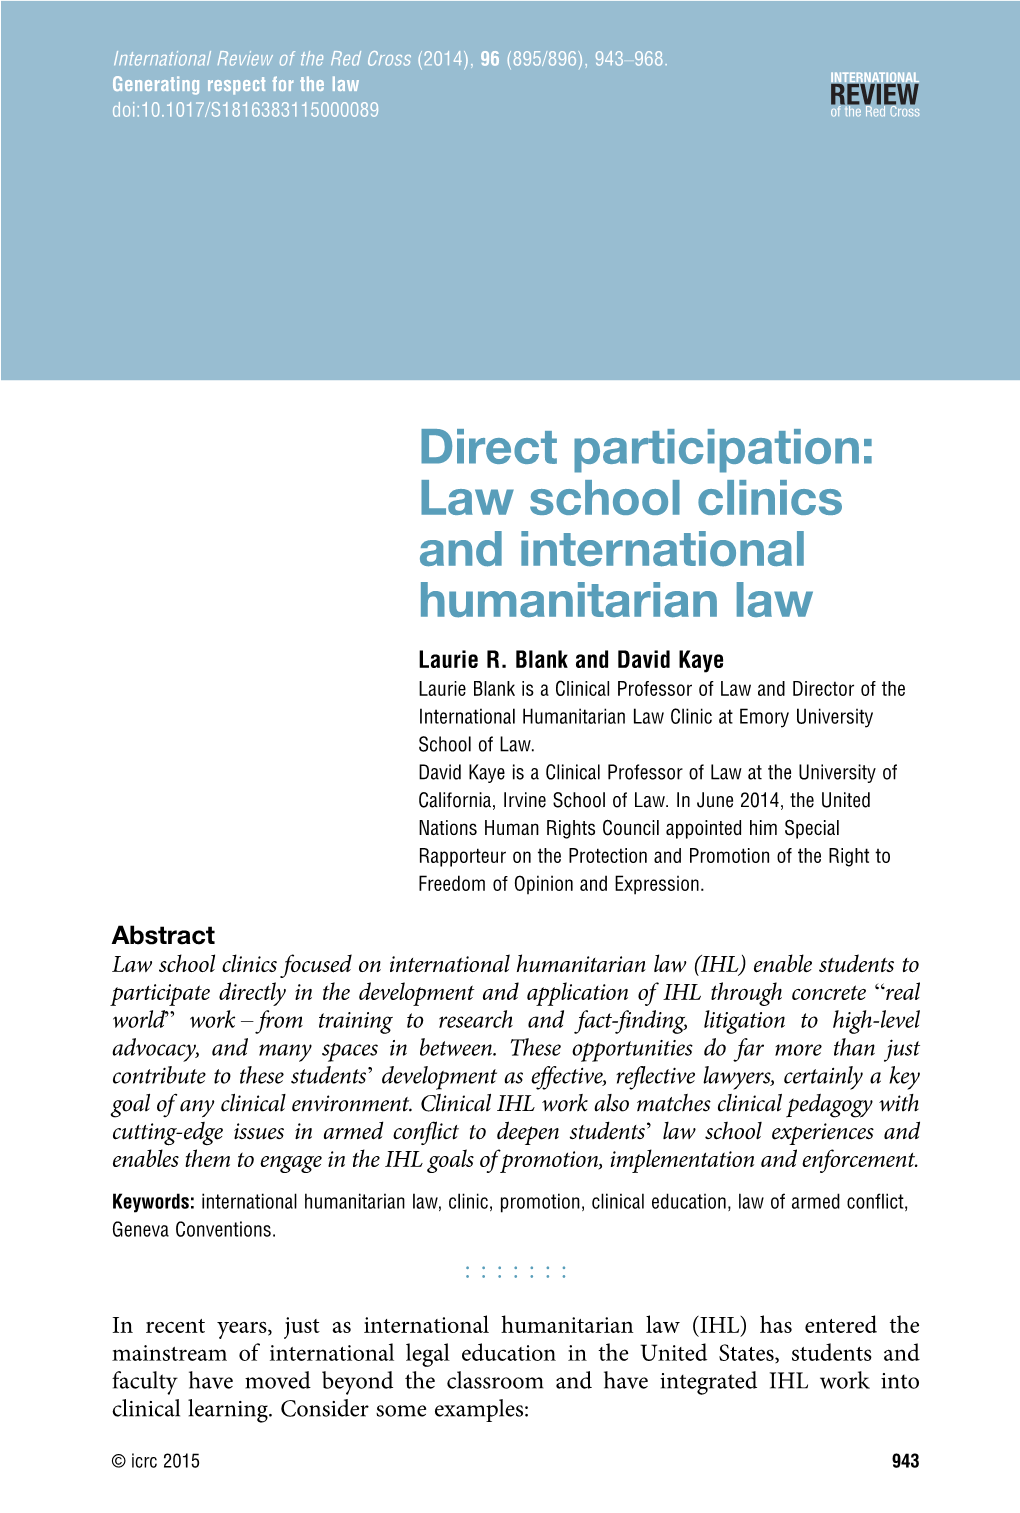 Direct Participation: Law School Clinics and International Humanitarian Law Laurie R